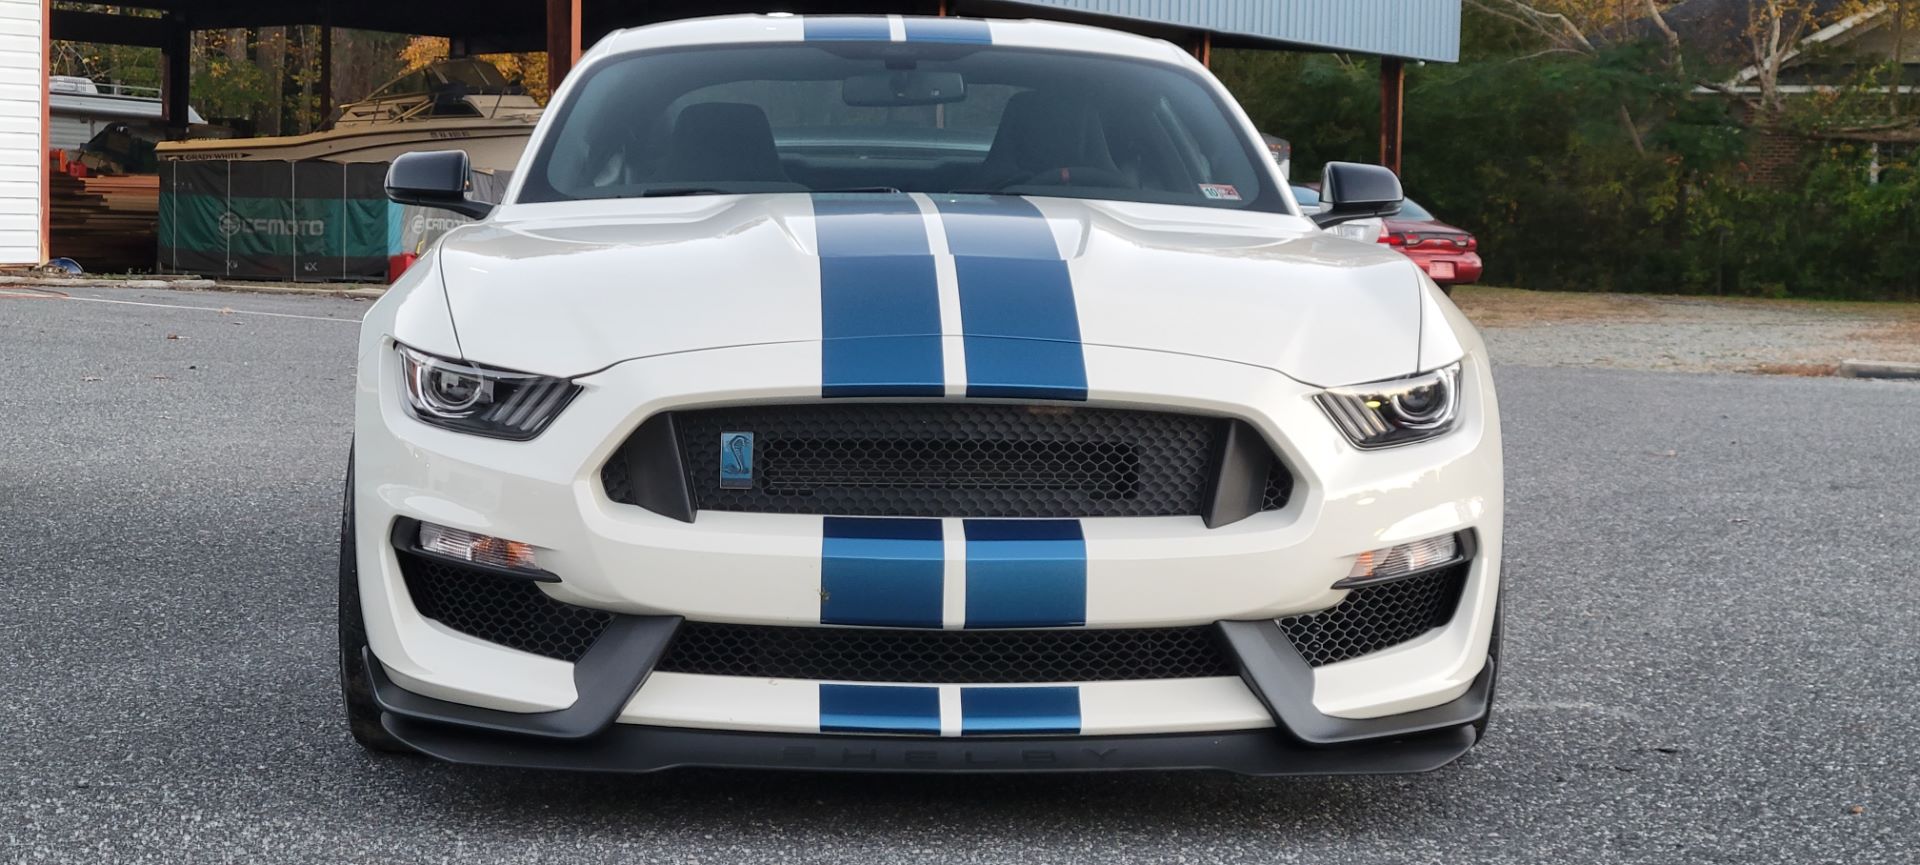 2020 Ford MUSTANG SHELBY in Hayes, Virginia - Photo 2